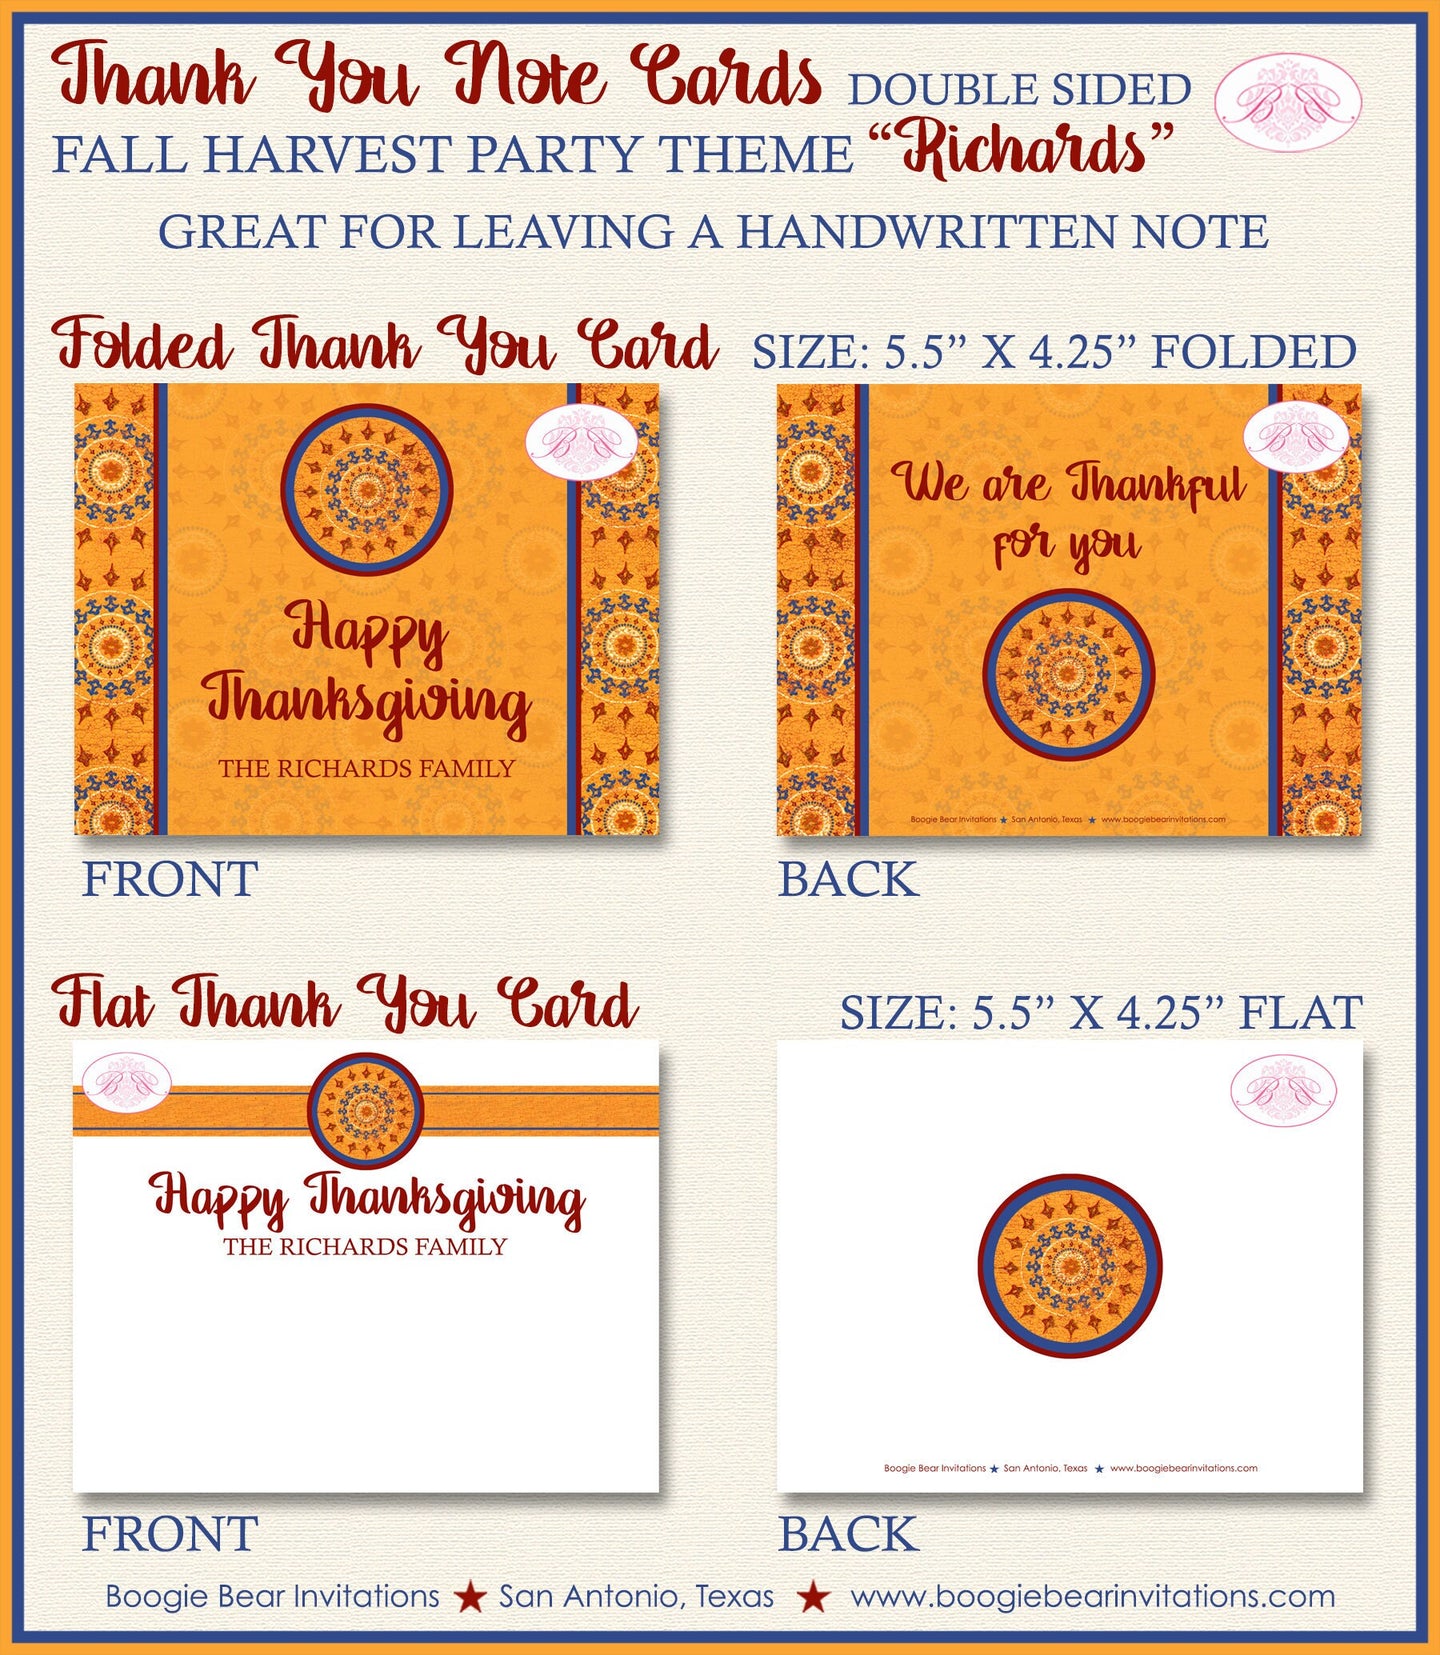 Thanksgiving Dinner Thank You Cards Flat Folded Note Medallion Stone Harvest Gold Fall Autumn Boogie Bear Invitations Richards Theme Printed